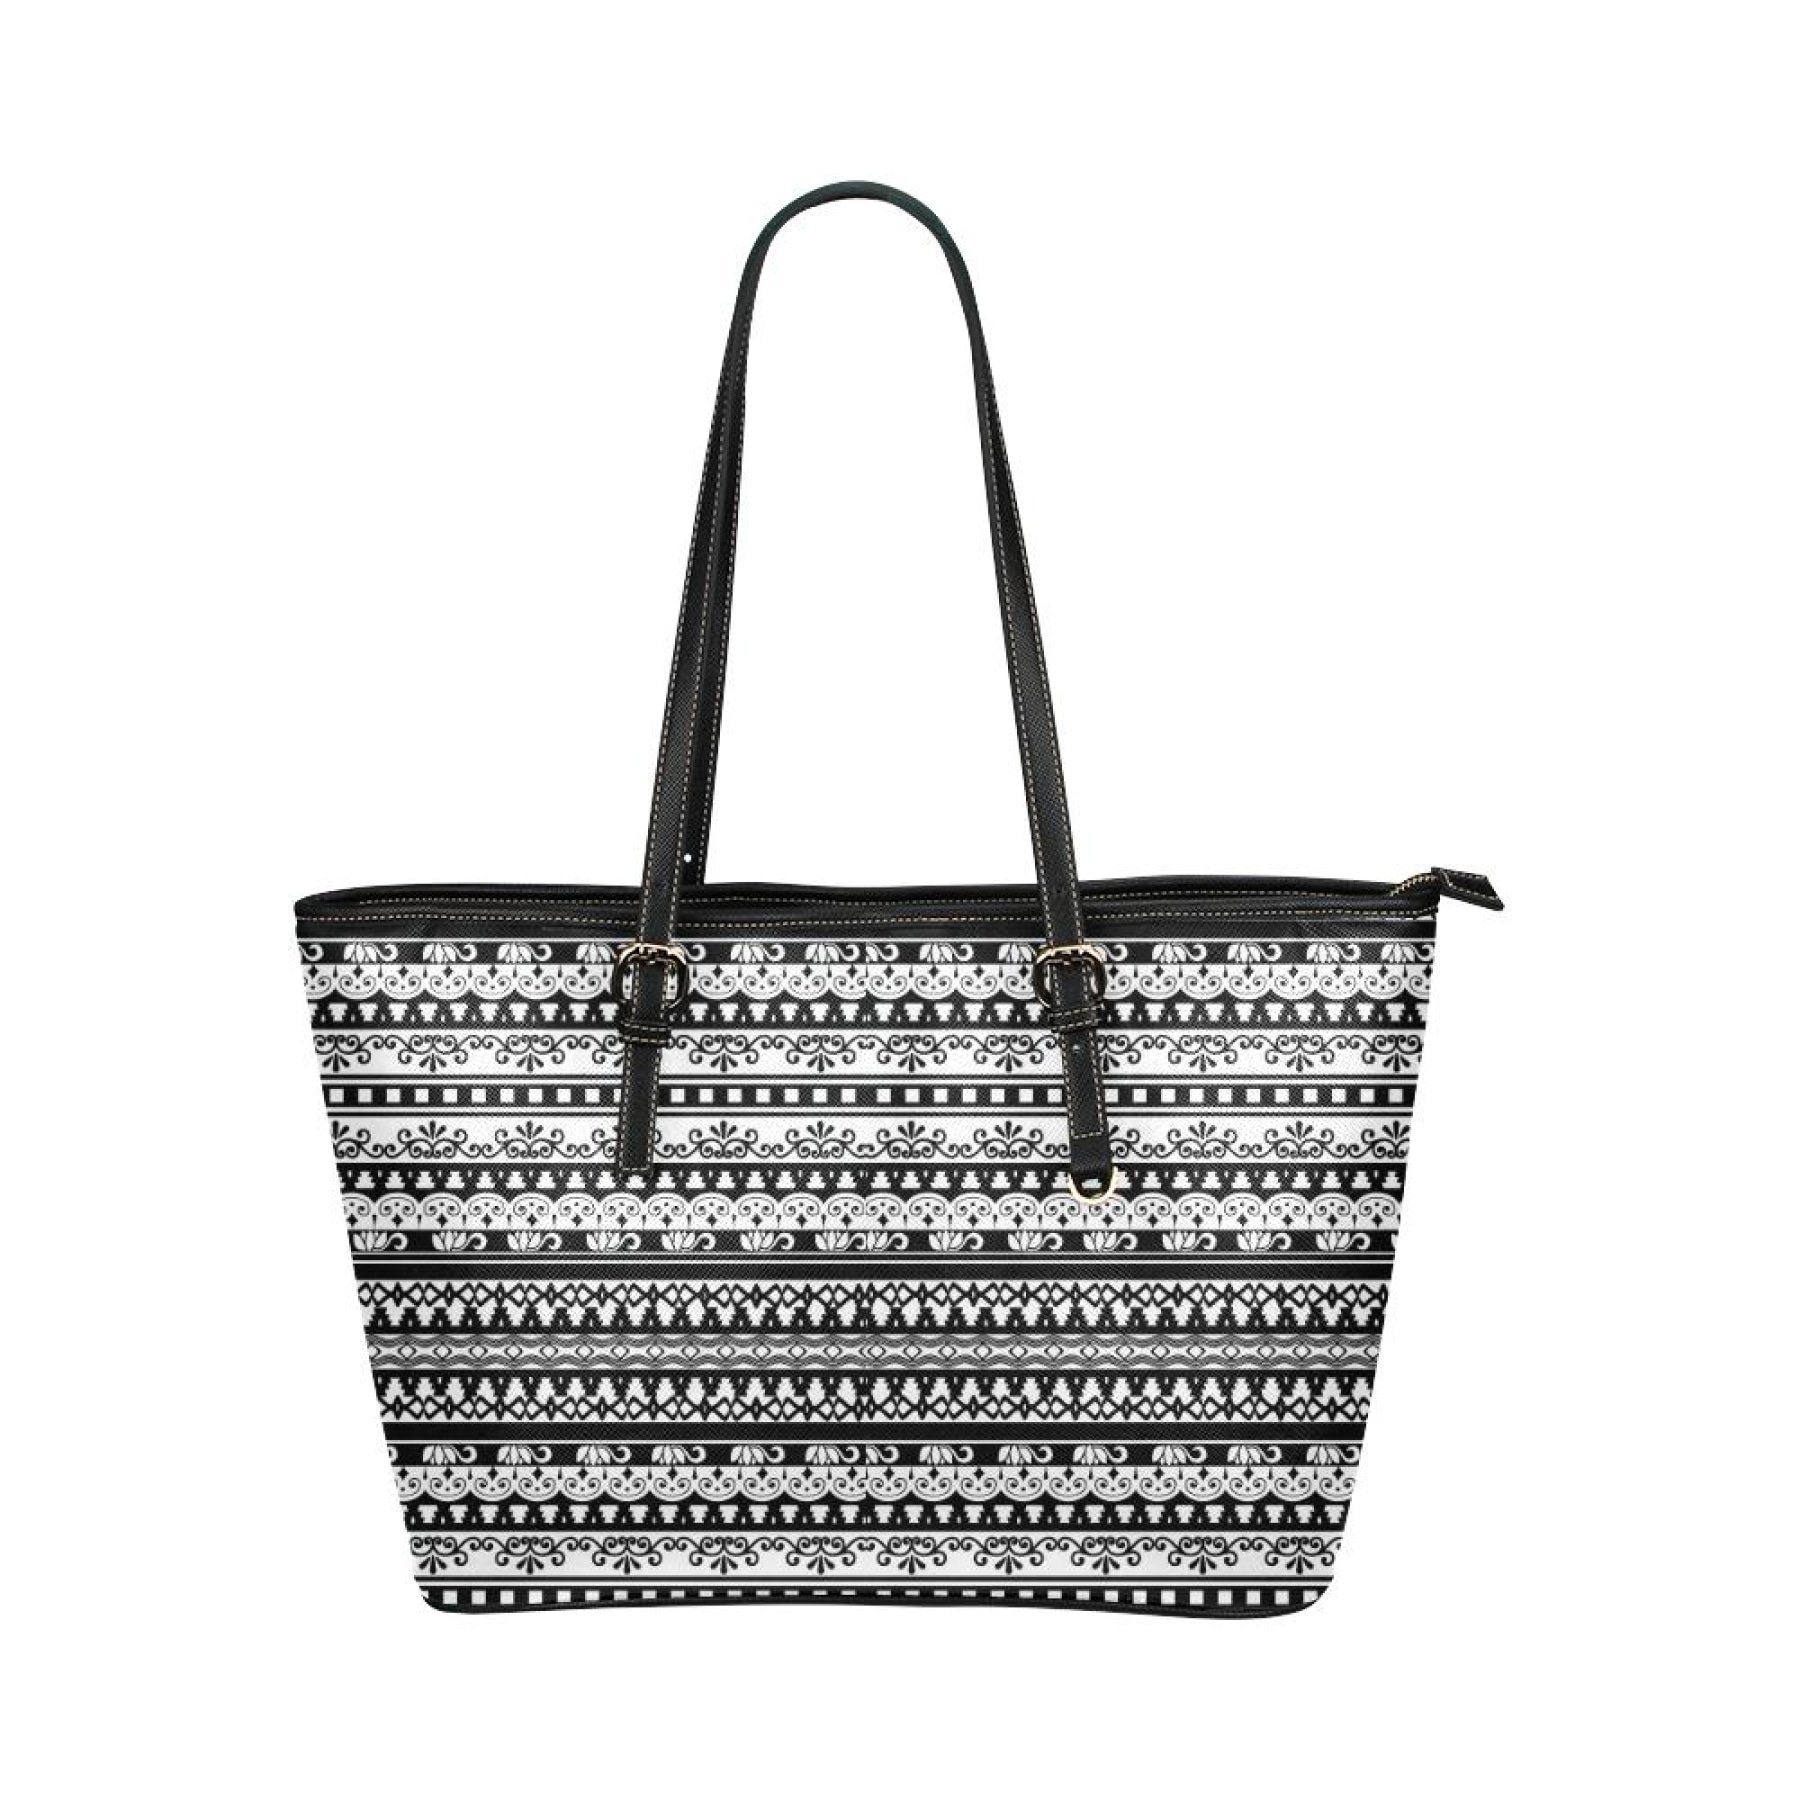 Black And White Vintage Style Leather Tote Bag 11